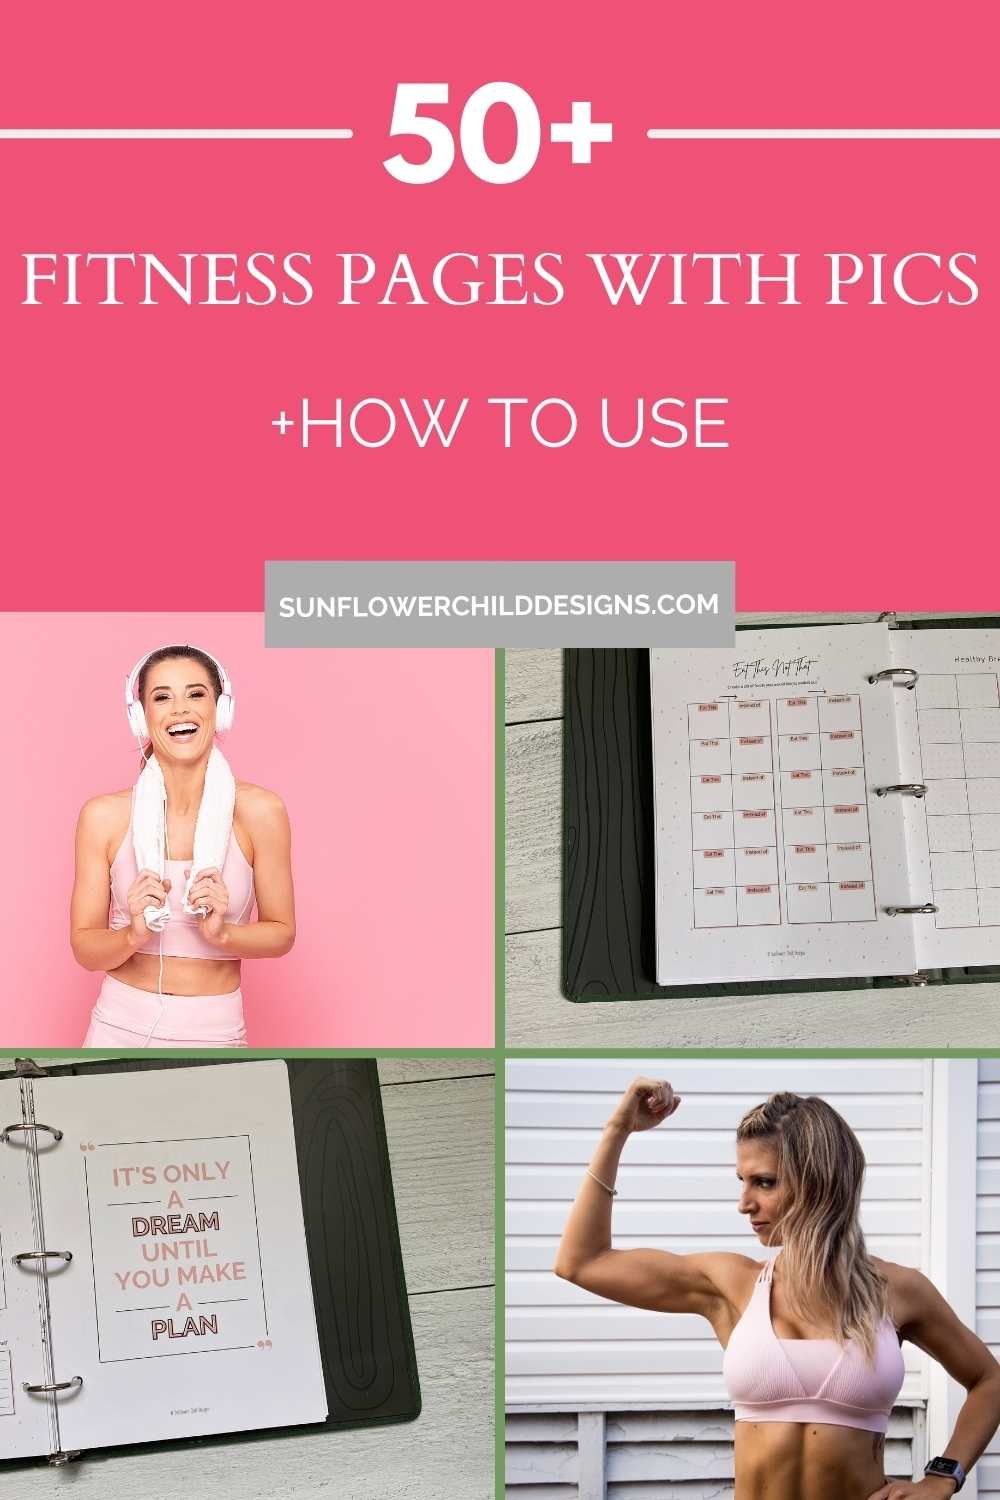 Kickstart Your Fitness Journey with 50+ Inspirational Planner Pages